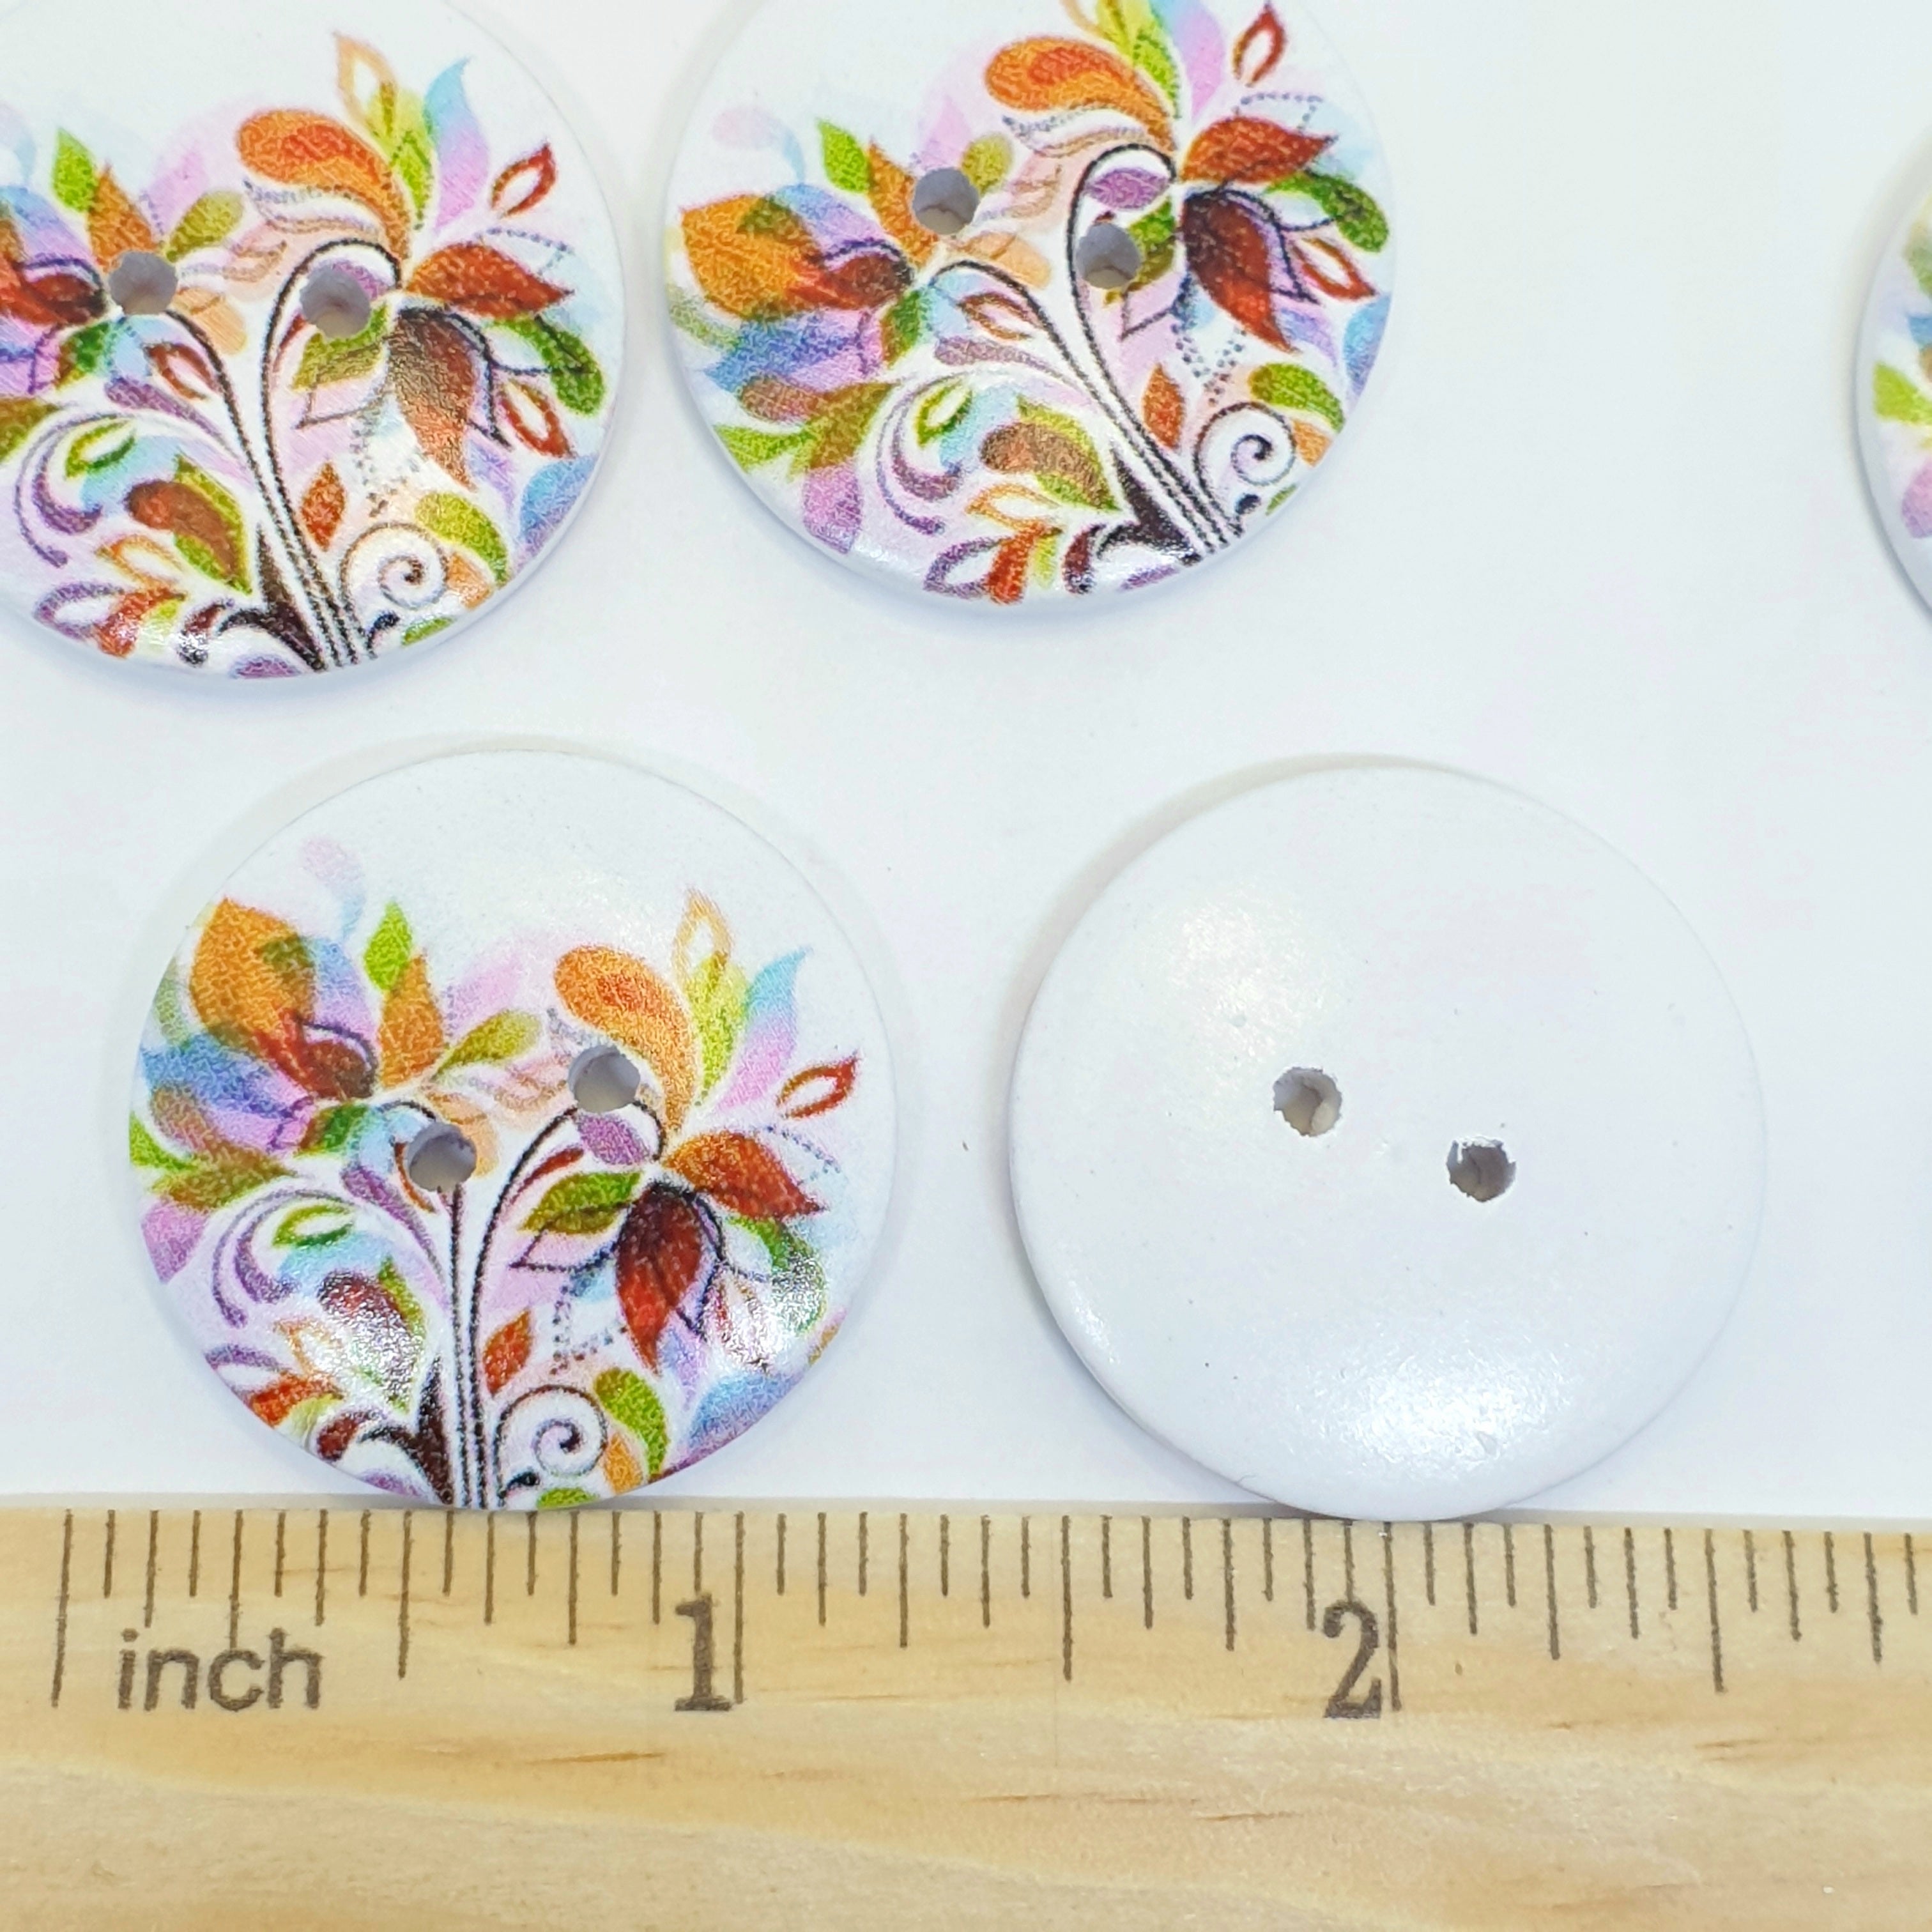 MajorCrafts 16pcs 30mm White & Orange Fiery Flower Pattern 2 Holes Large Wooden Sewing Buttons